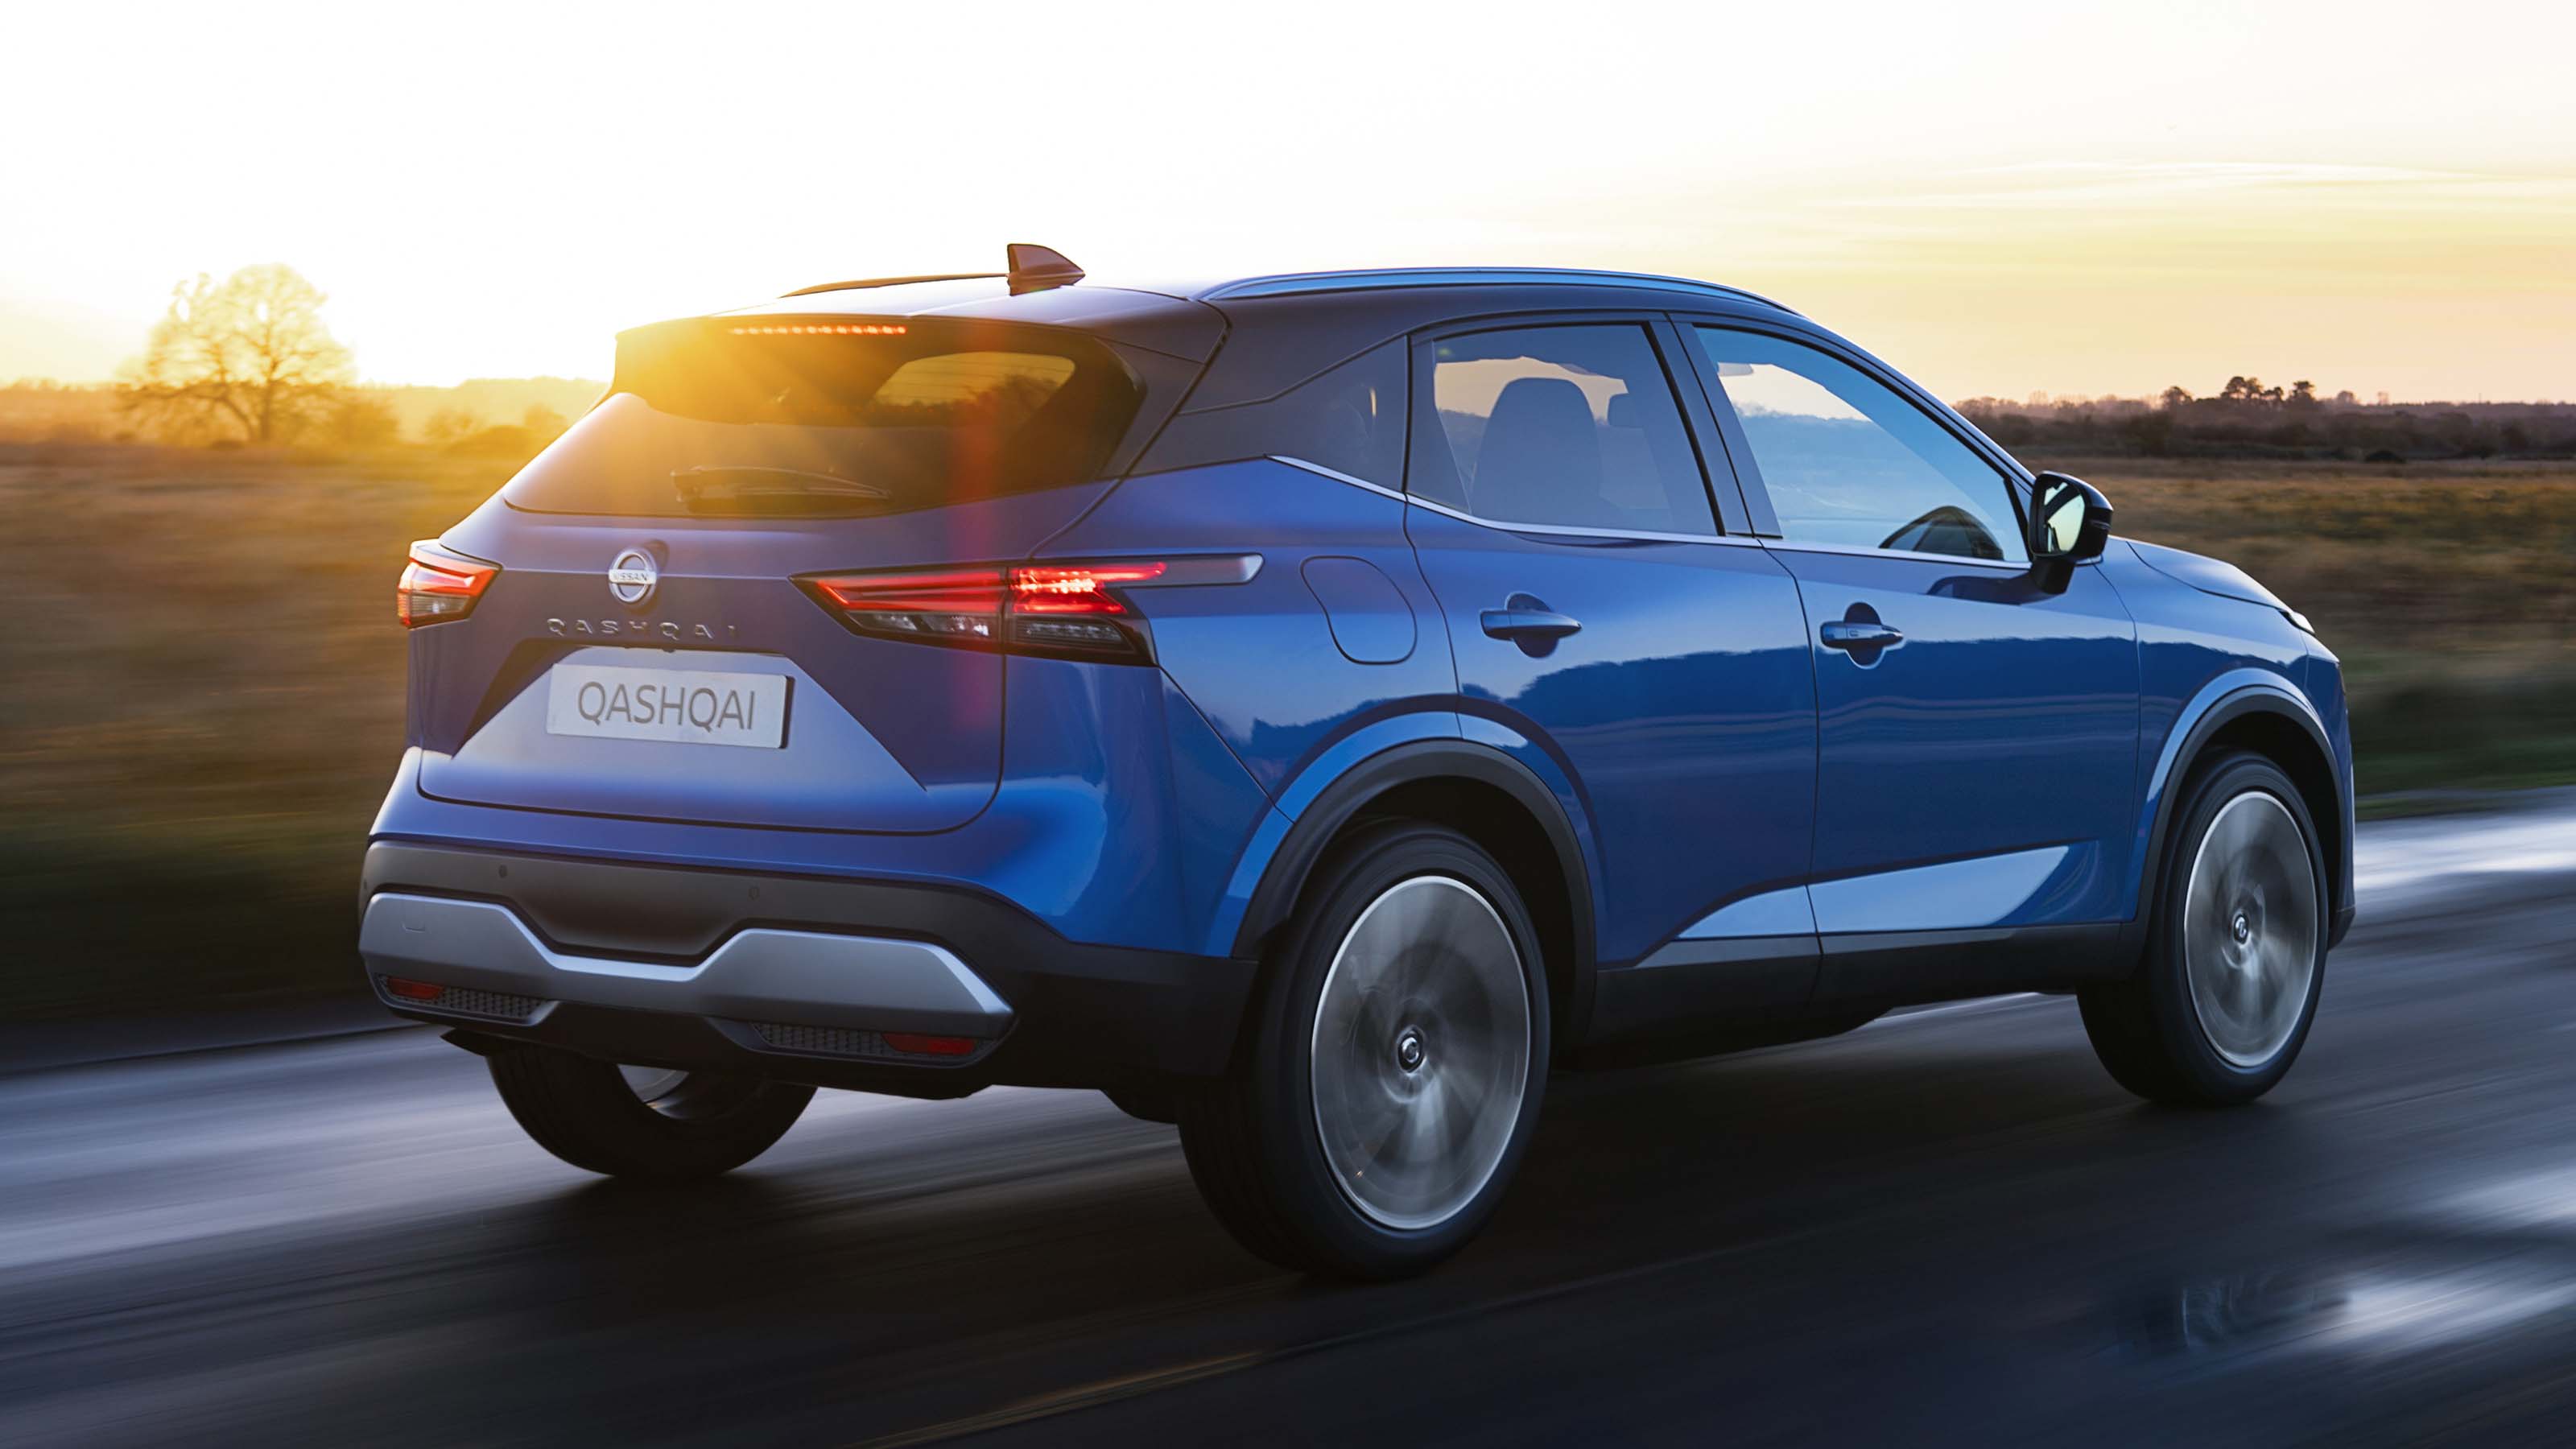 New 2021 Nissan Qashqai pictures, and on-sale date | DrivingElectric